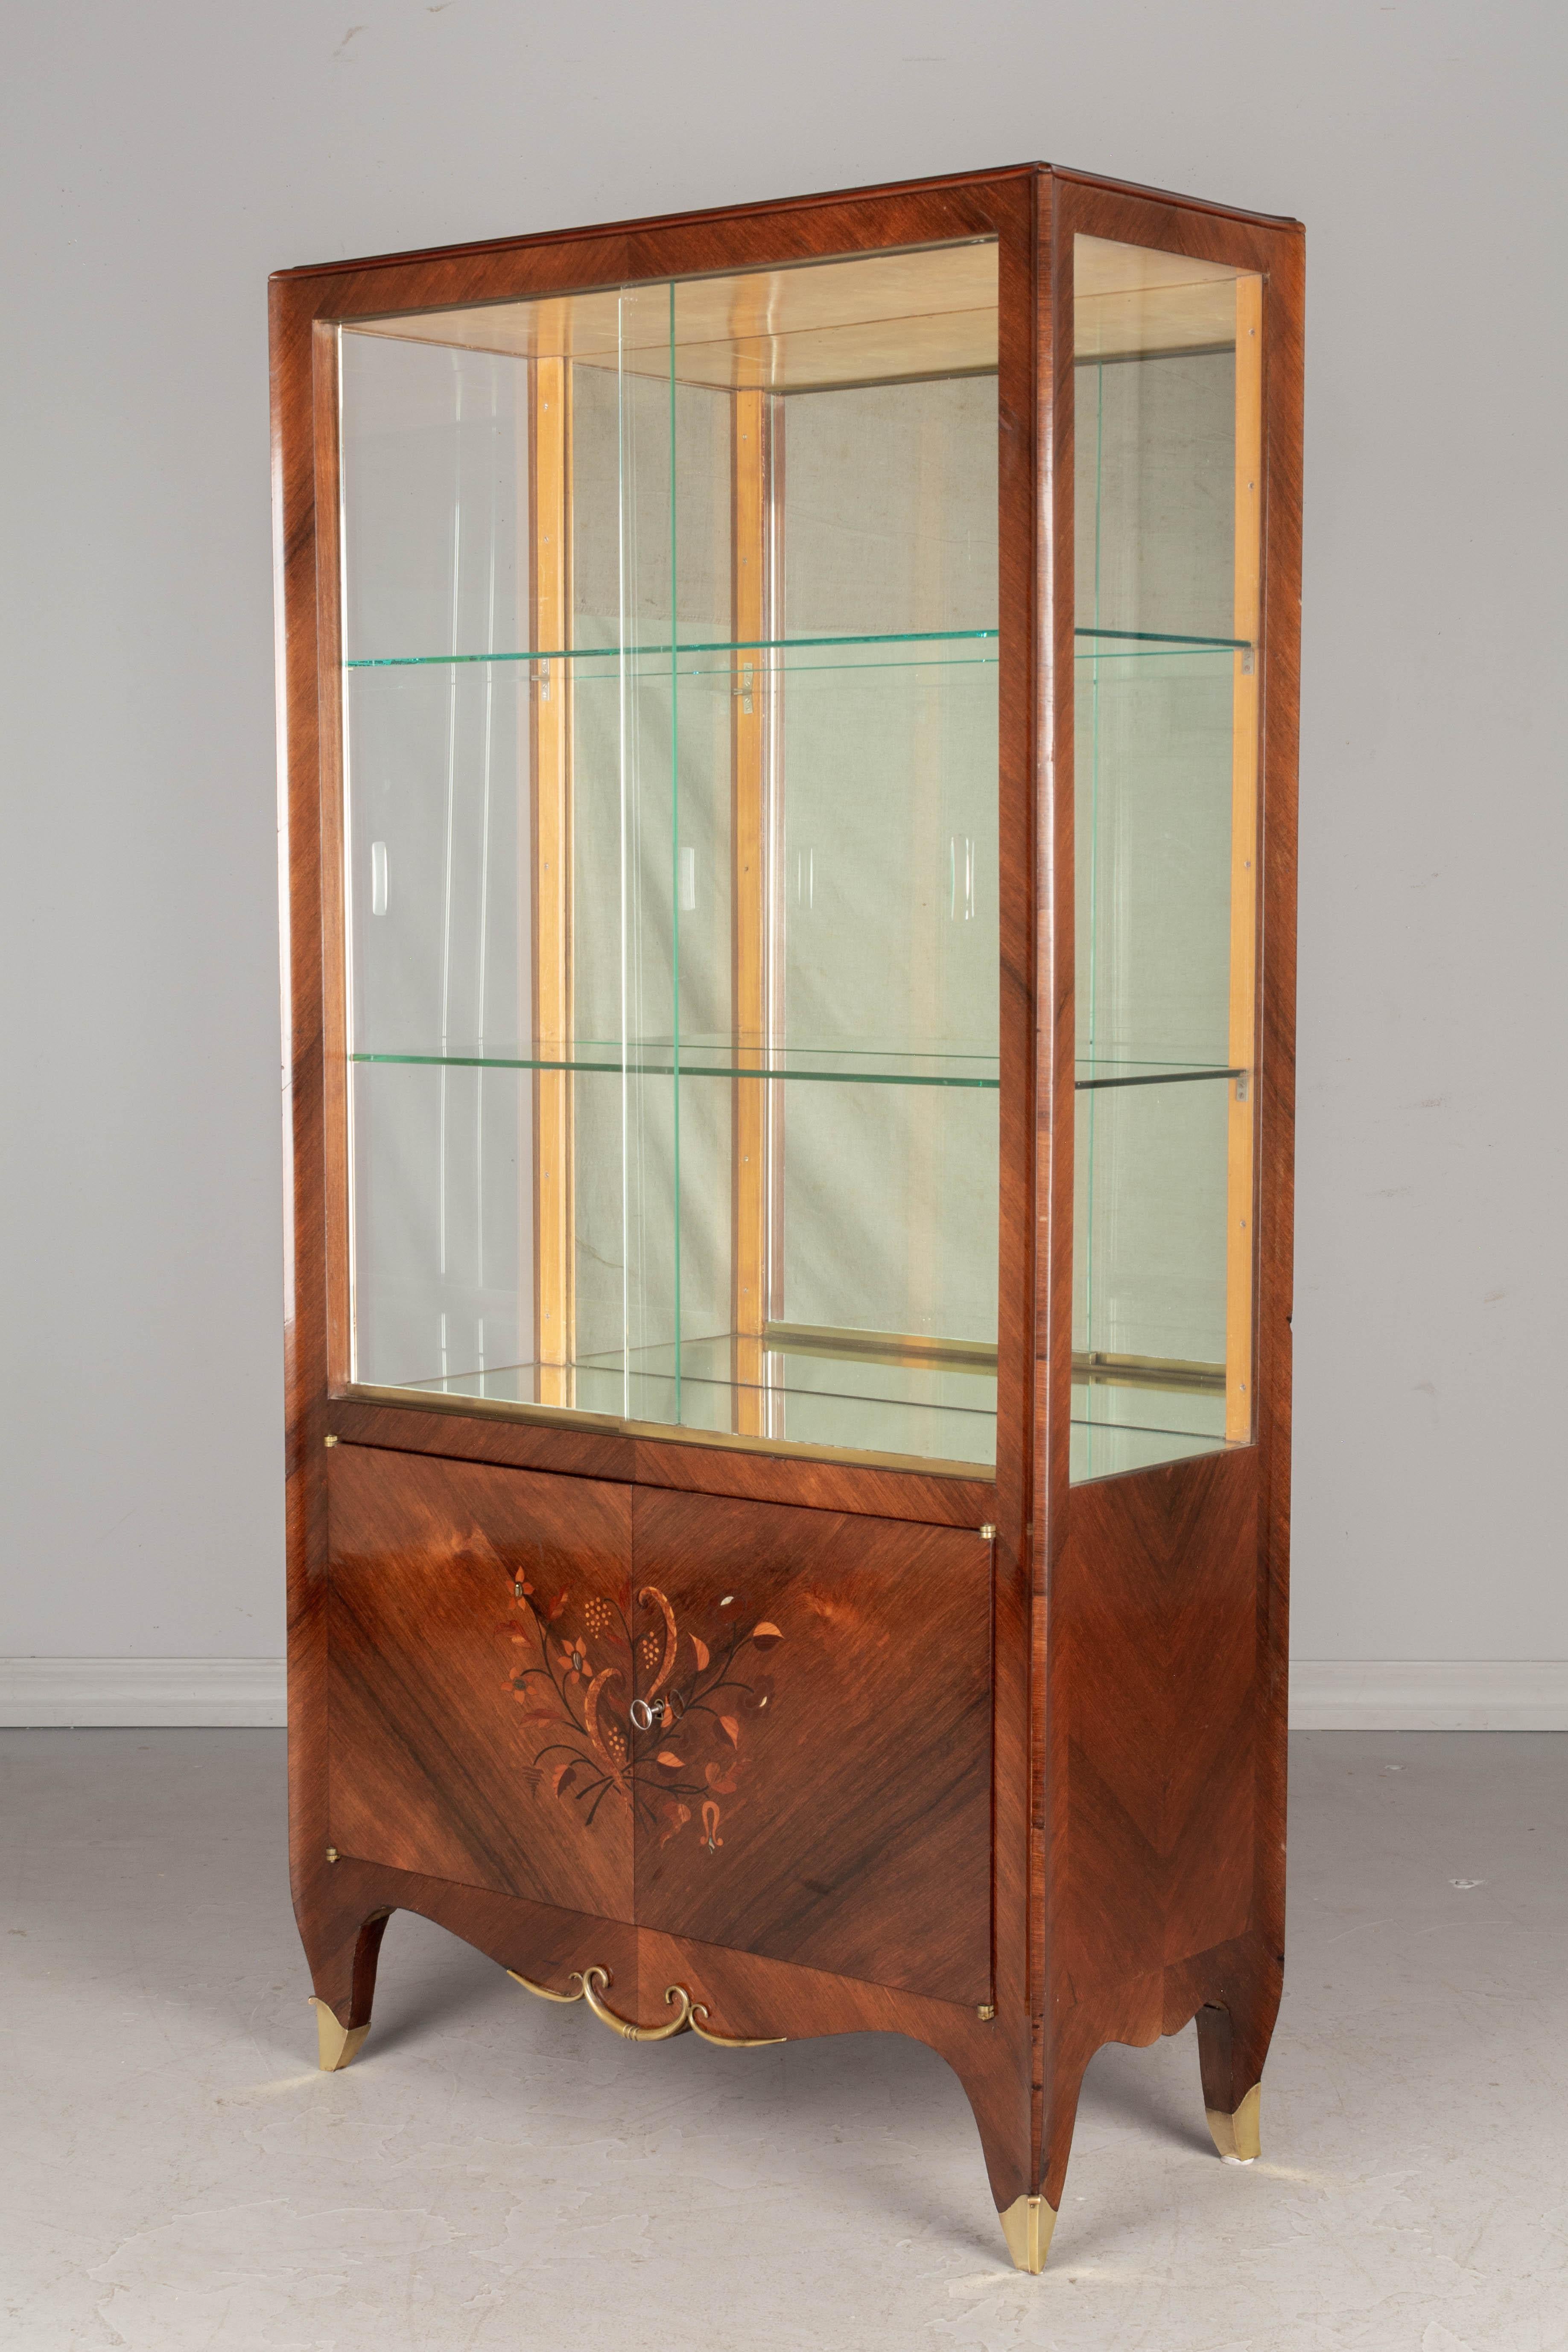 A French Art Deco mahogany marquetry vitrine, or display cabinet, attributed to designer and decorator Baptistin Spade (1891-1969). Fine stylized floral decoration with mother of pearl and abalone inlay. Scalloped apron with brass decoration and